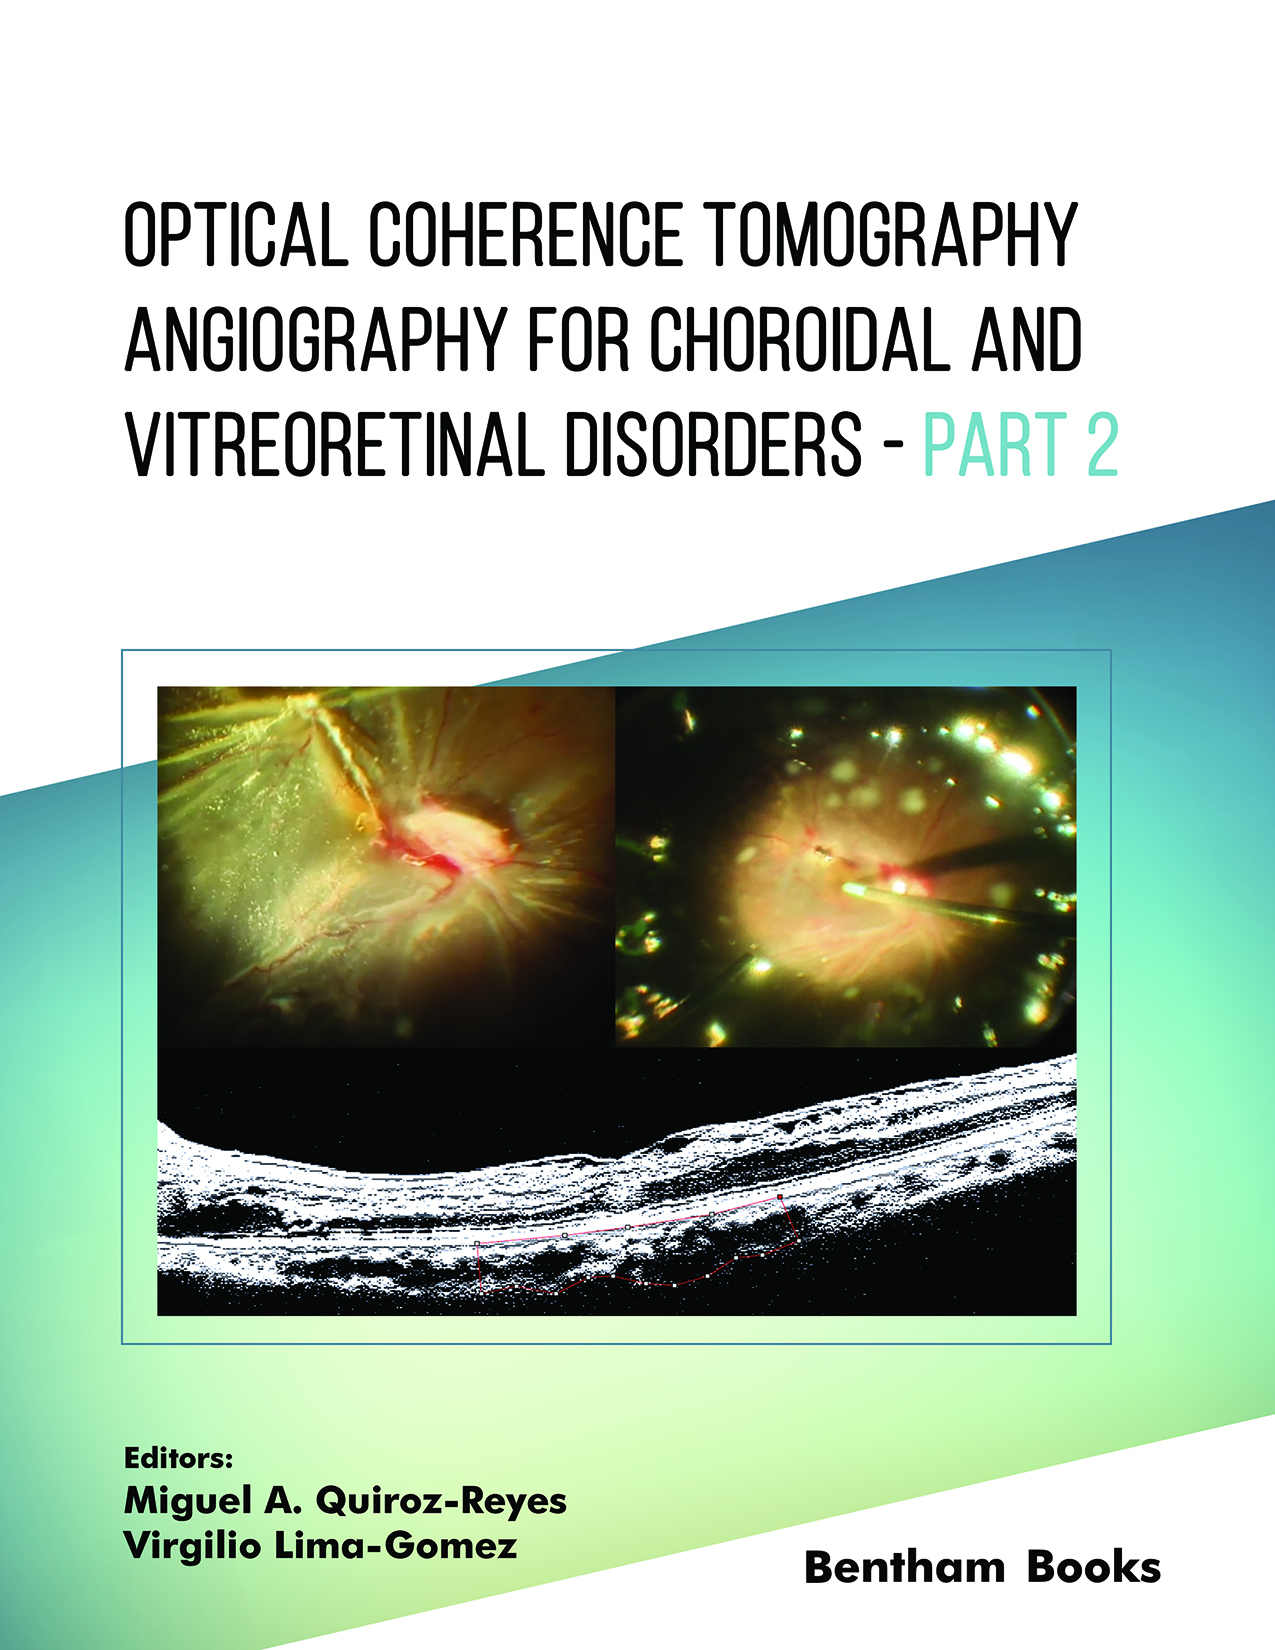 Optical Coherence Tomography Angiography for Choroidal and Vitreoretinal Disorders – Part 2